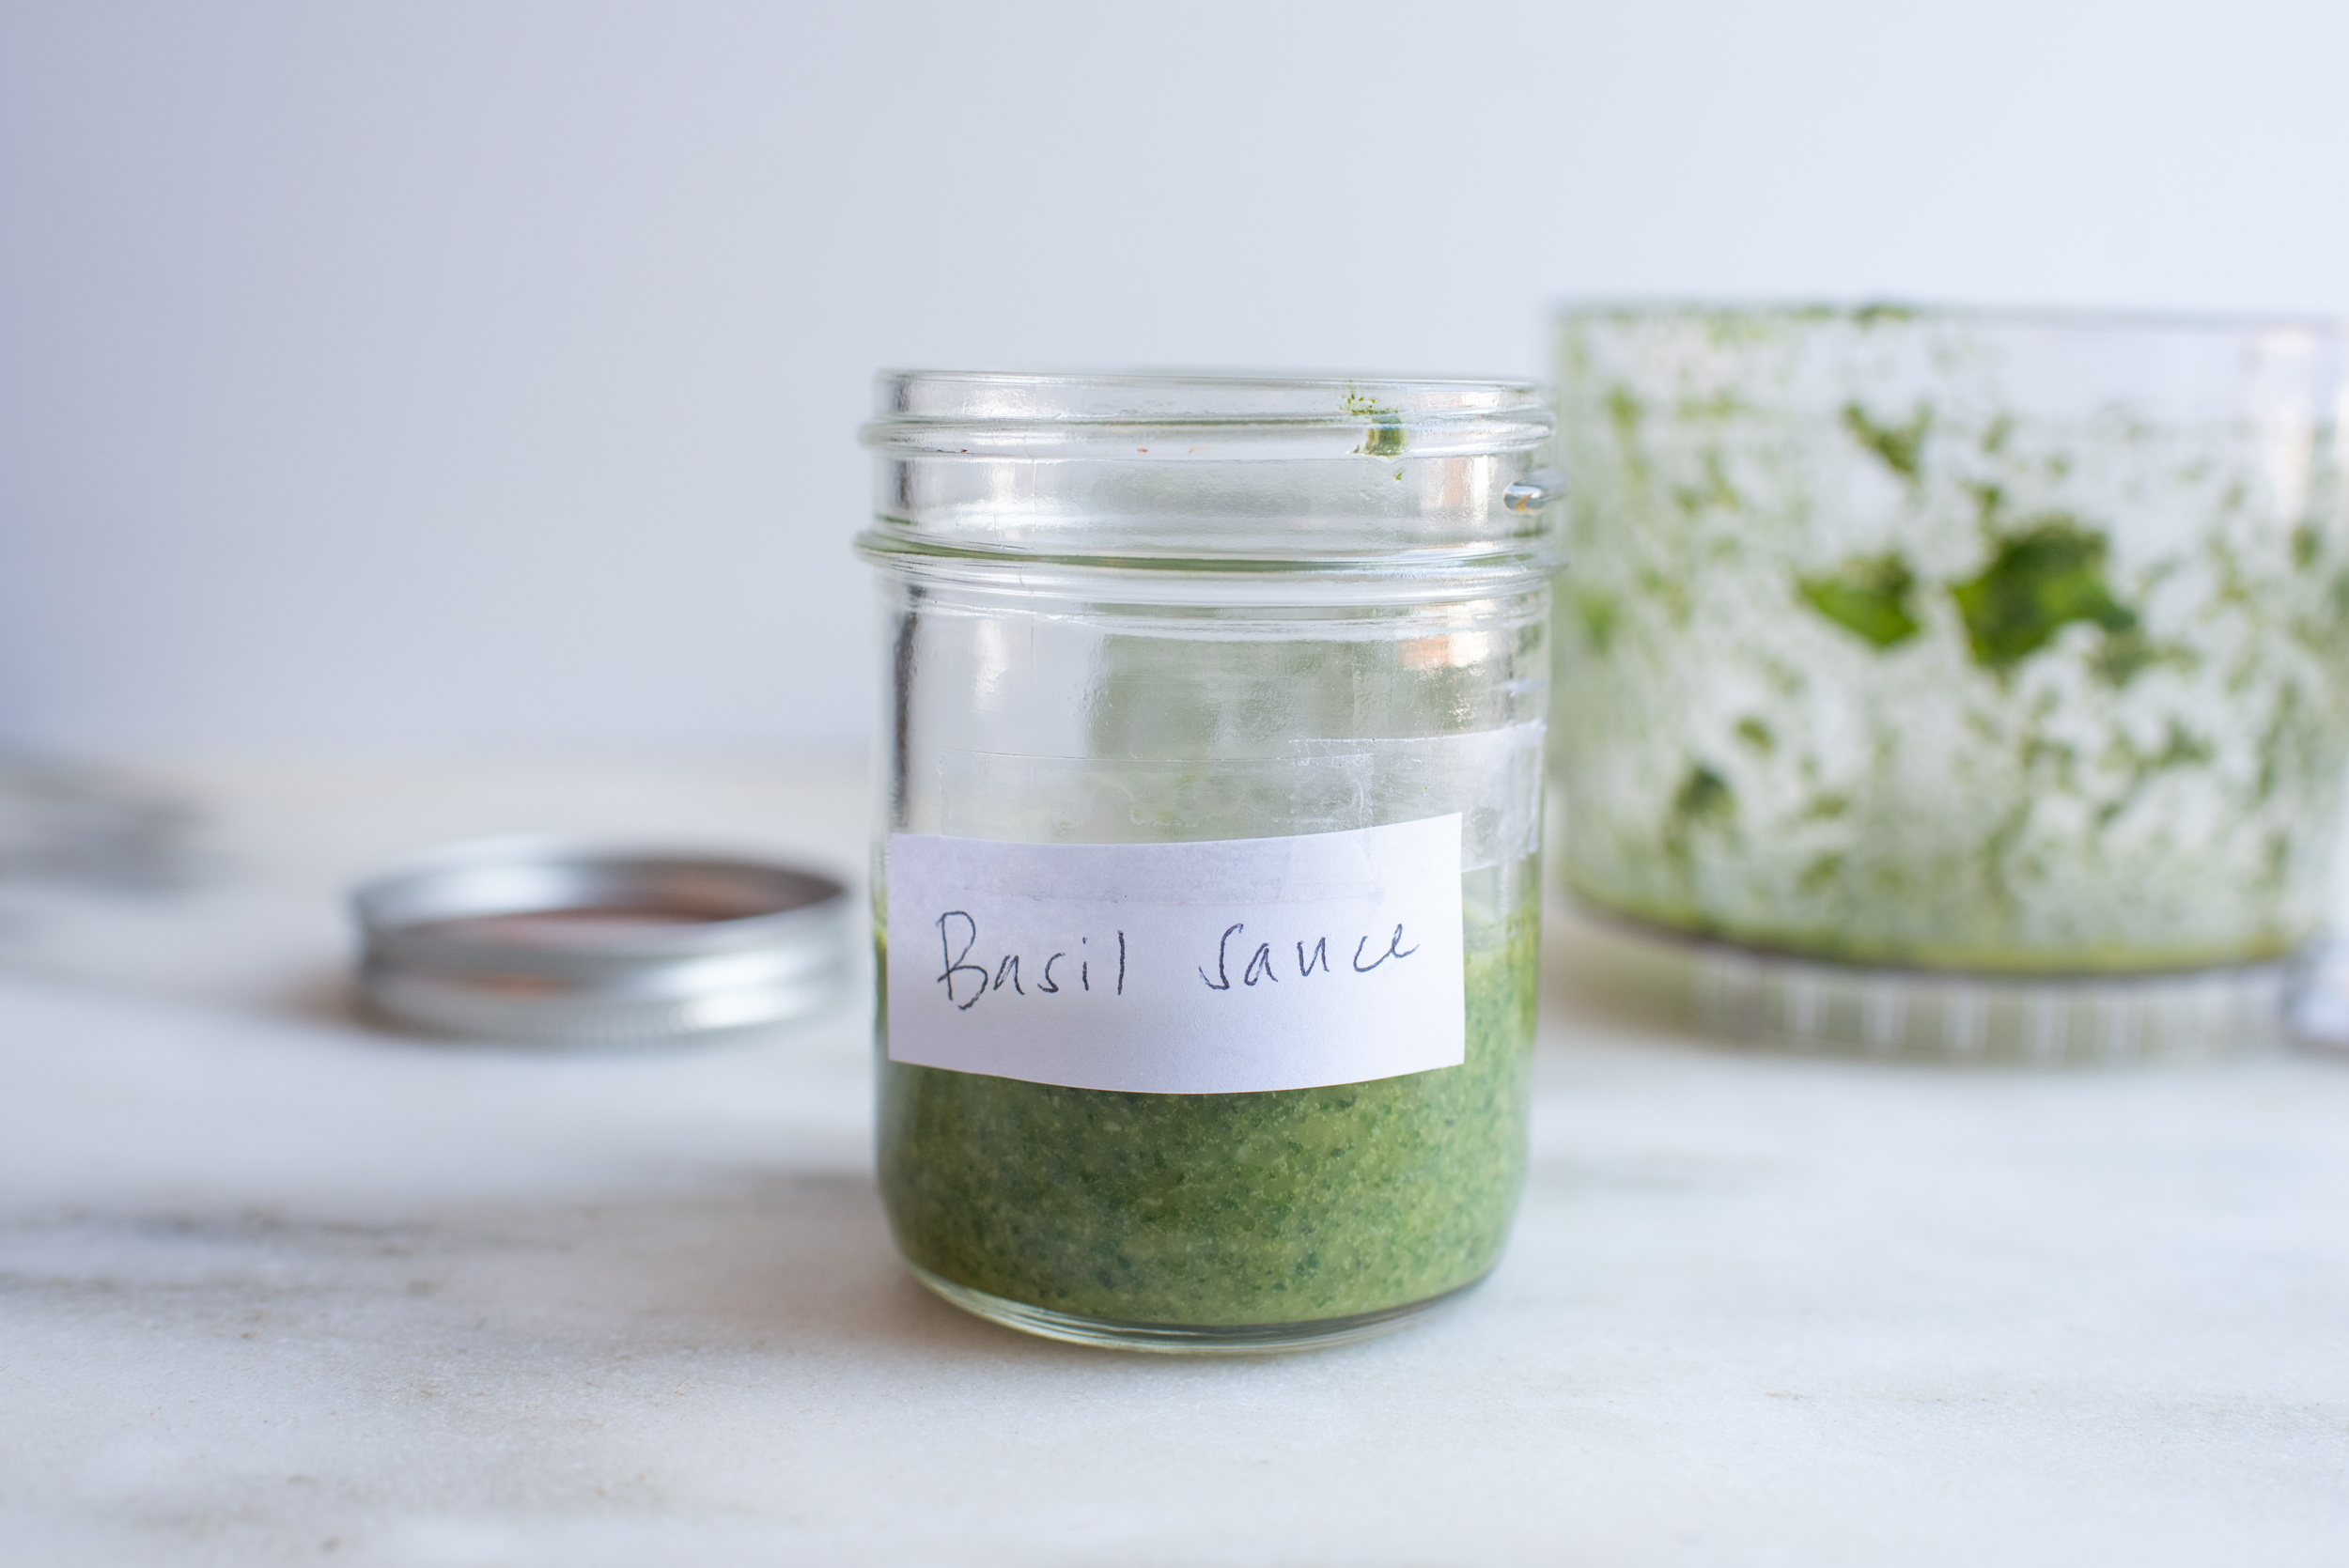 a glass jar half filled with green sauce and a label that reads "Basil Sauce"